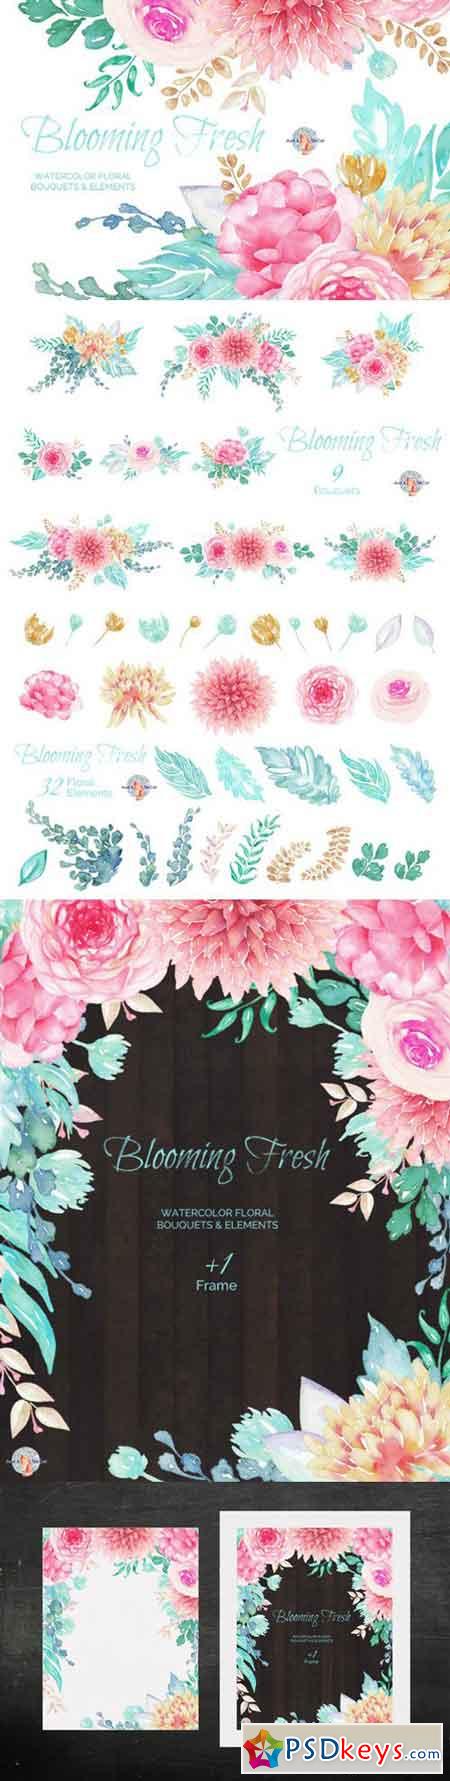 Blooming Fresh Watercolor Clipart 450143